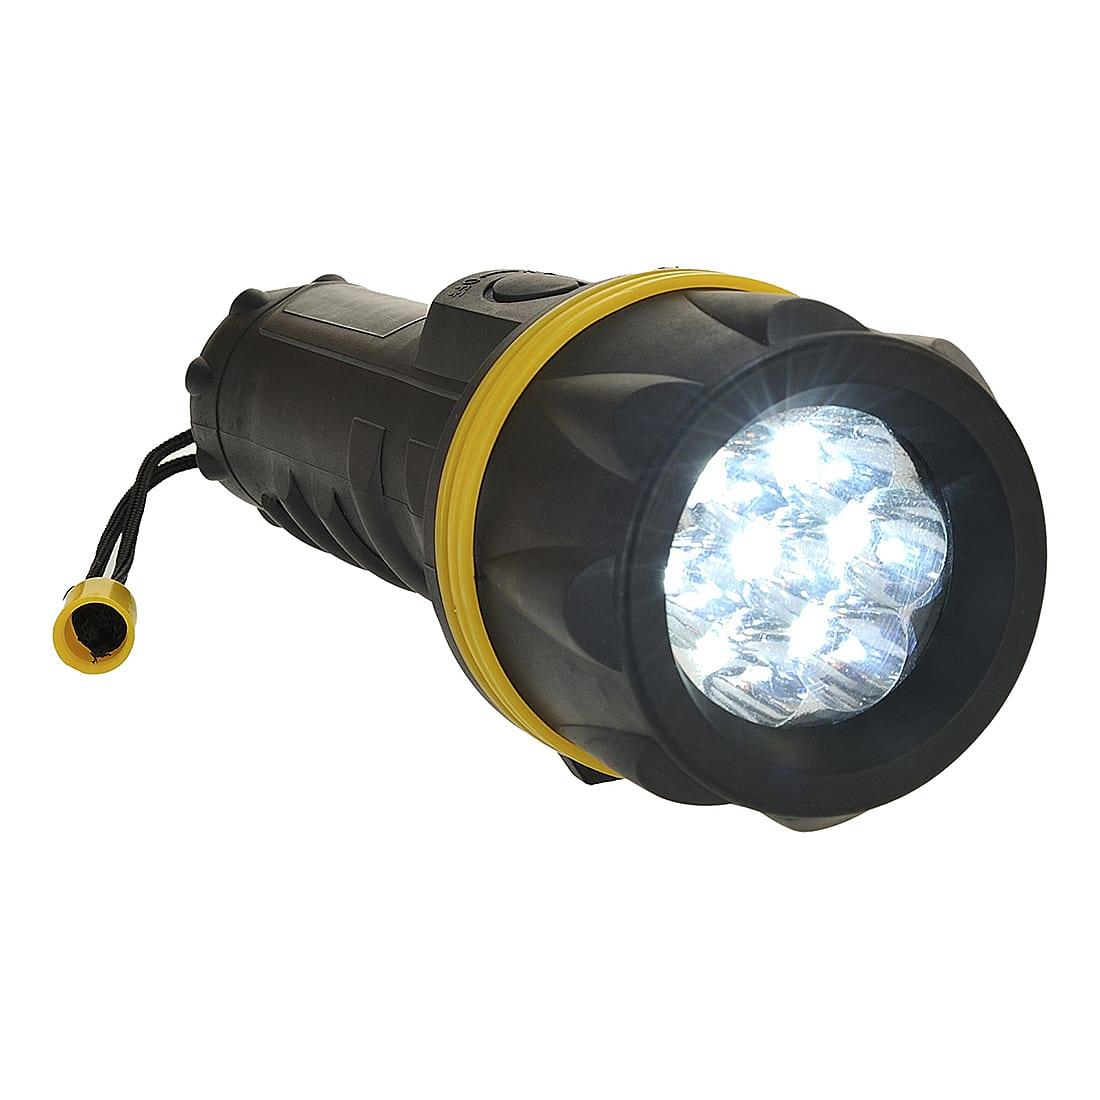 Portwest 7 LED Rubber Torch in Yellow / Black (Product Code: PA60)